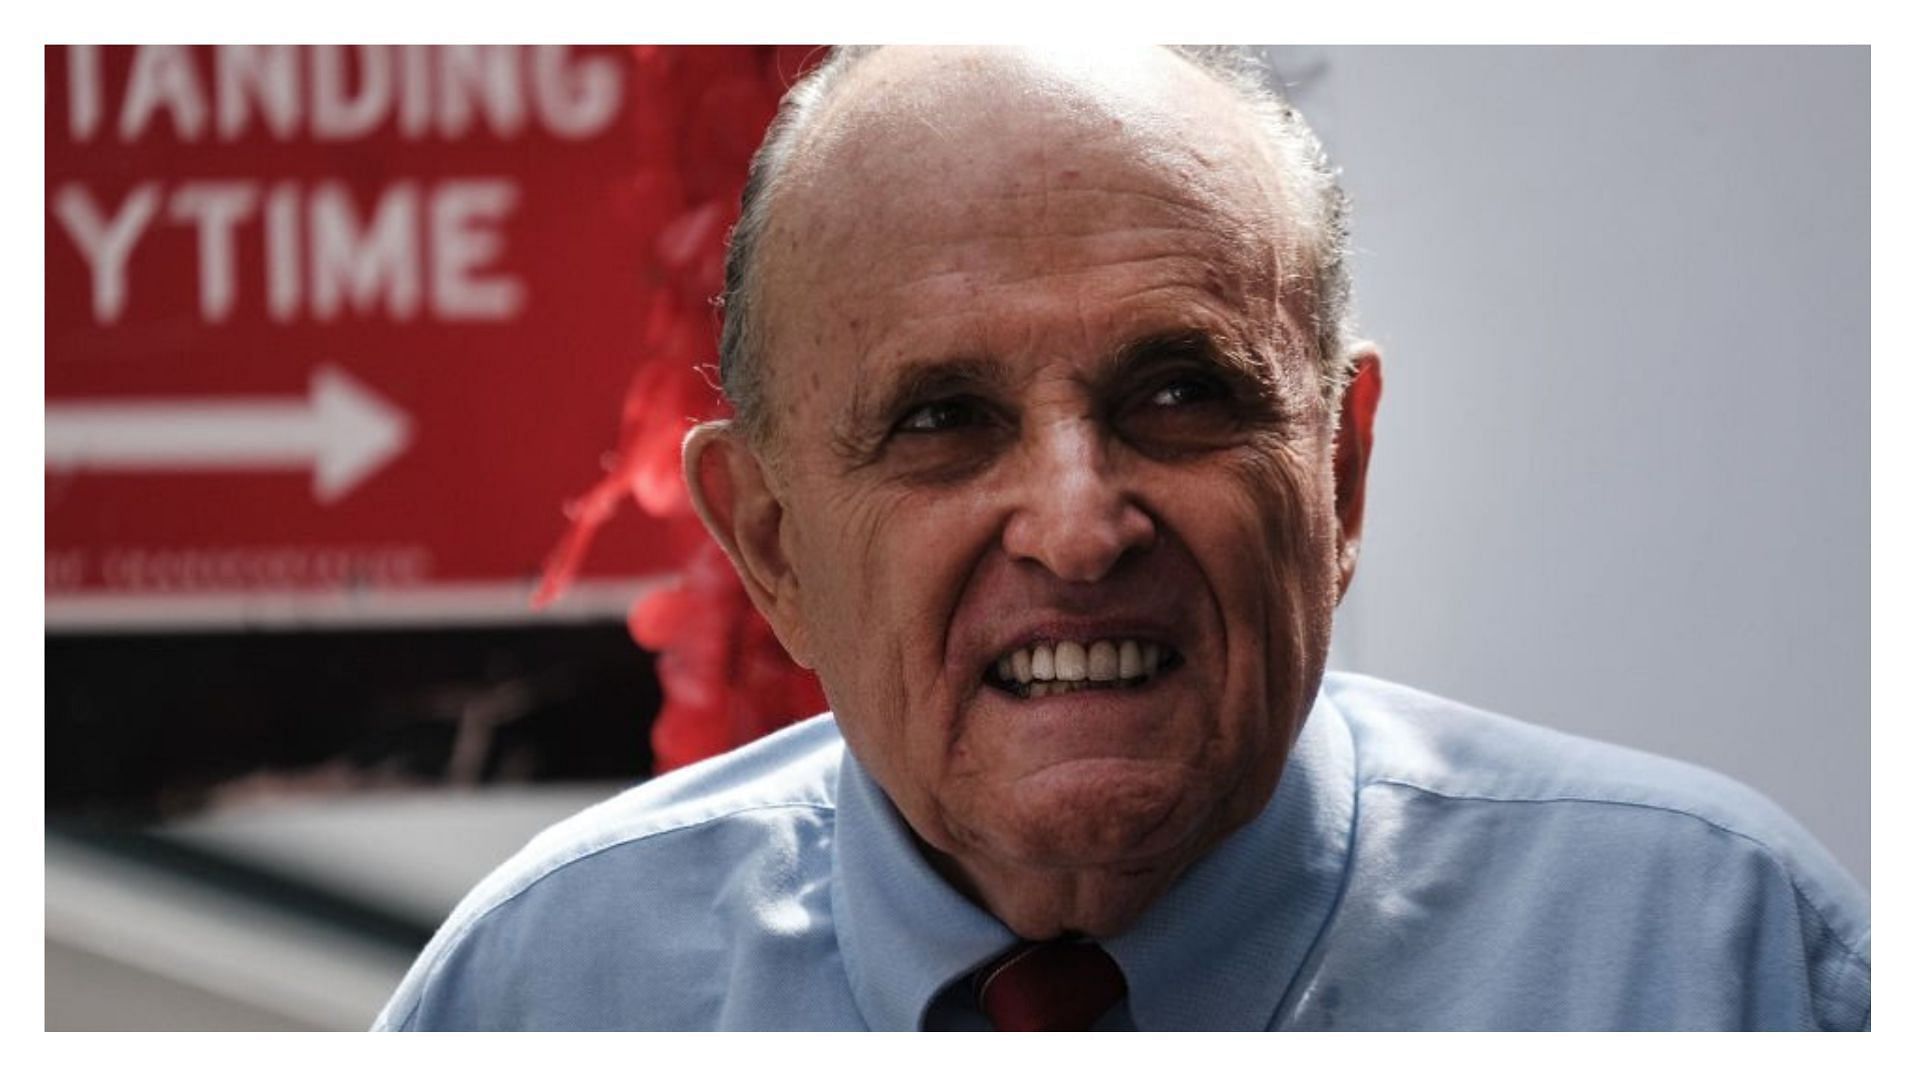 Rudy Giuliani was about to fall when he was hit (Image via Spencer Platt/Getty Images)